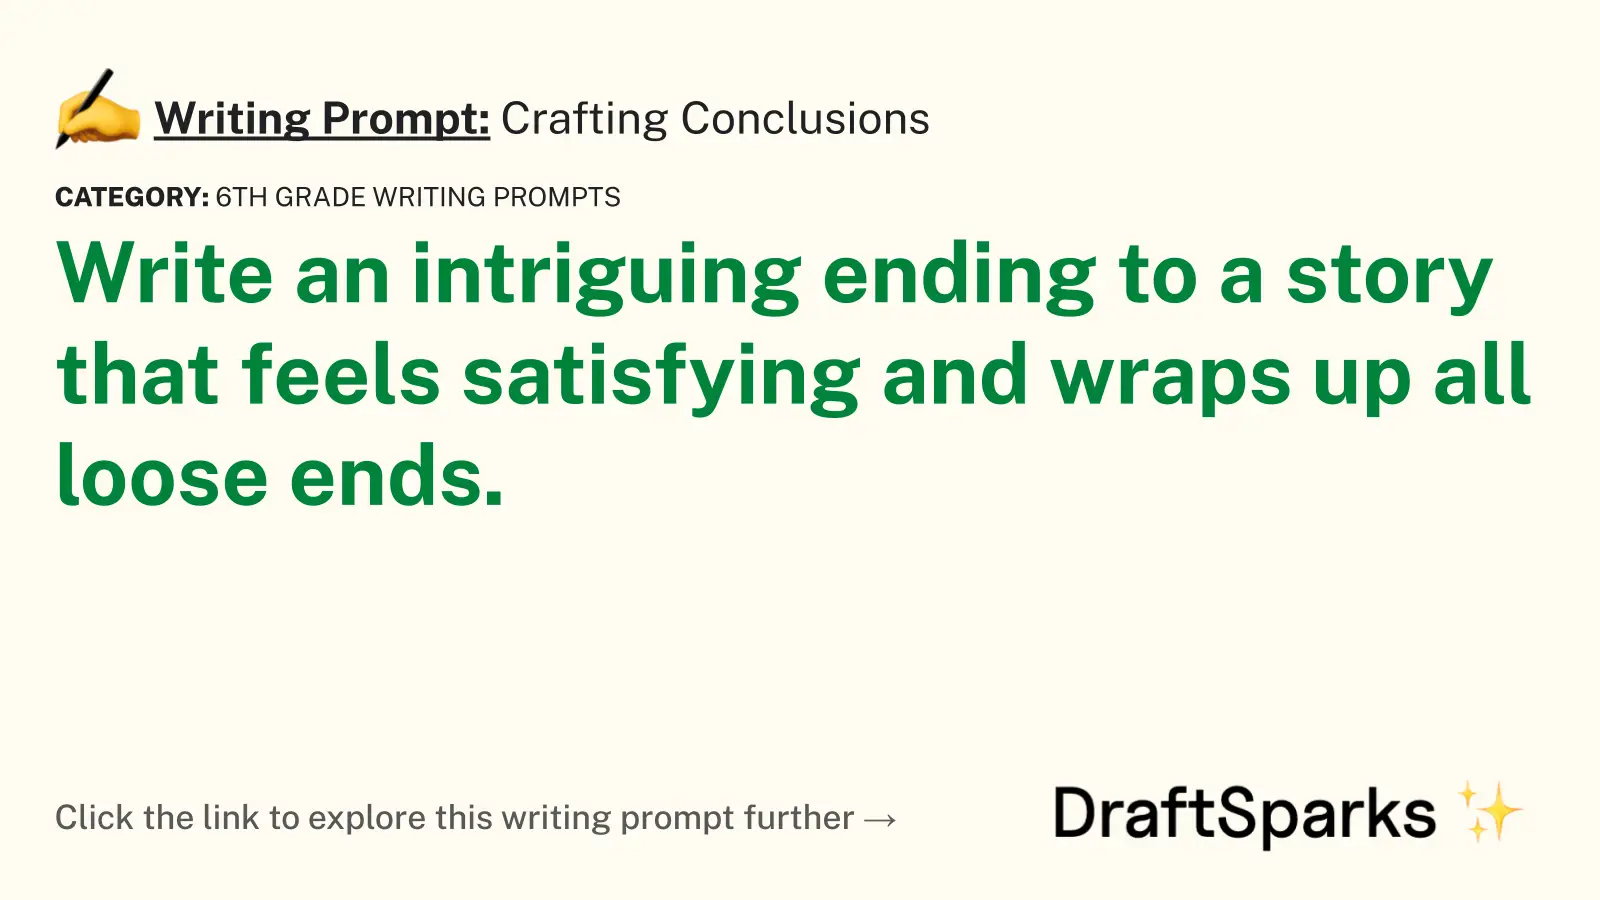 Crafting Conclusions